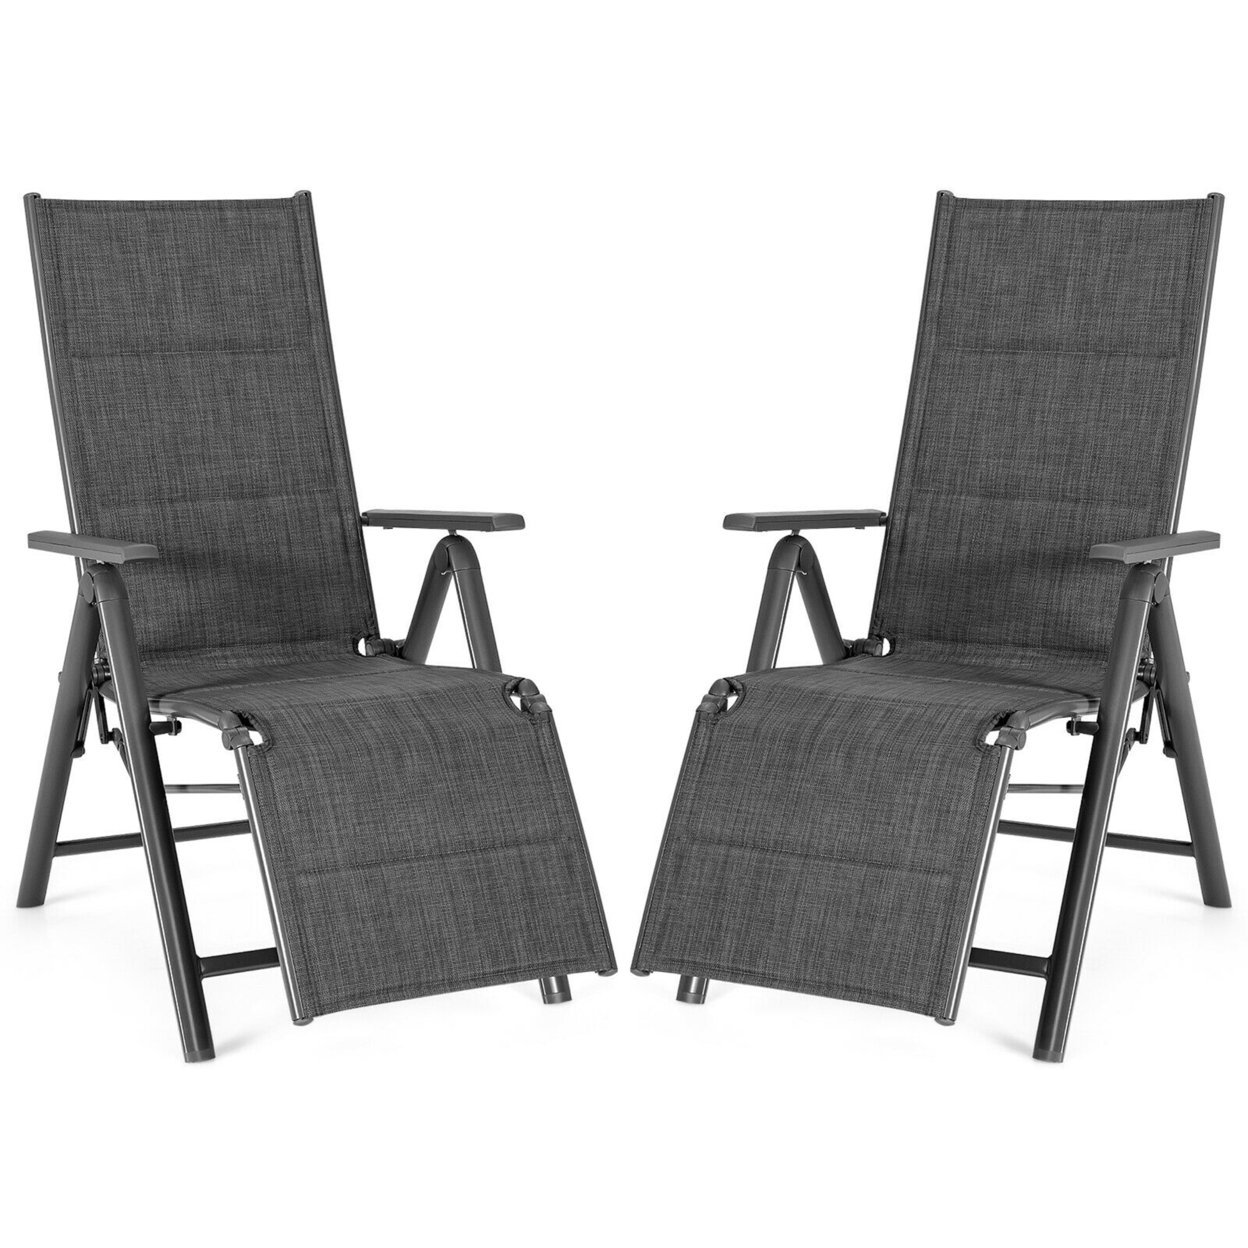 2PCS Patio Reclining Lounge Chair Adjustable Cotton-padded Folding Chair